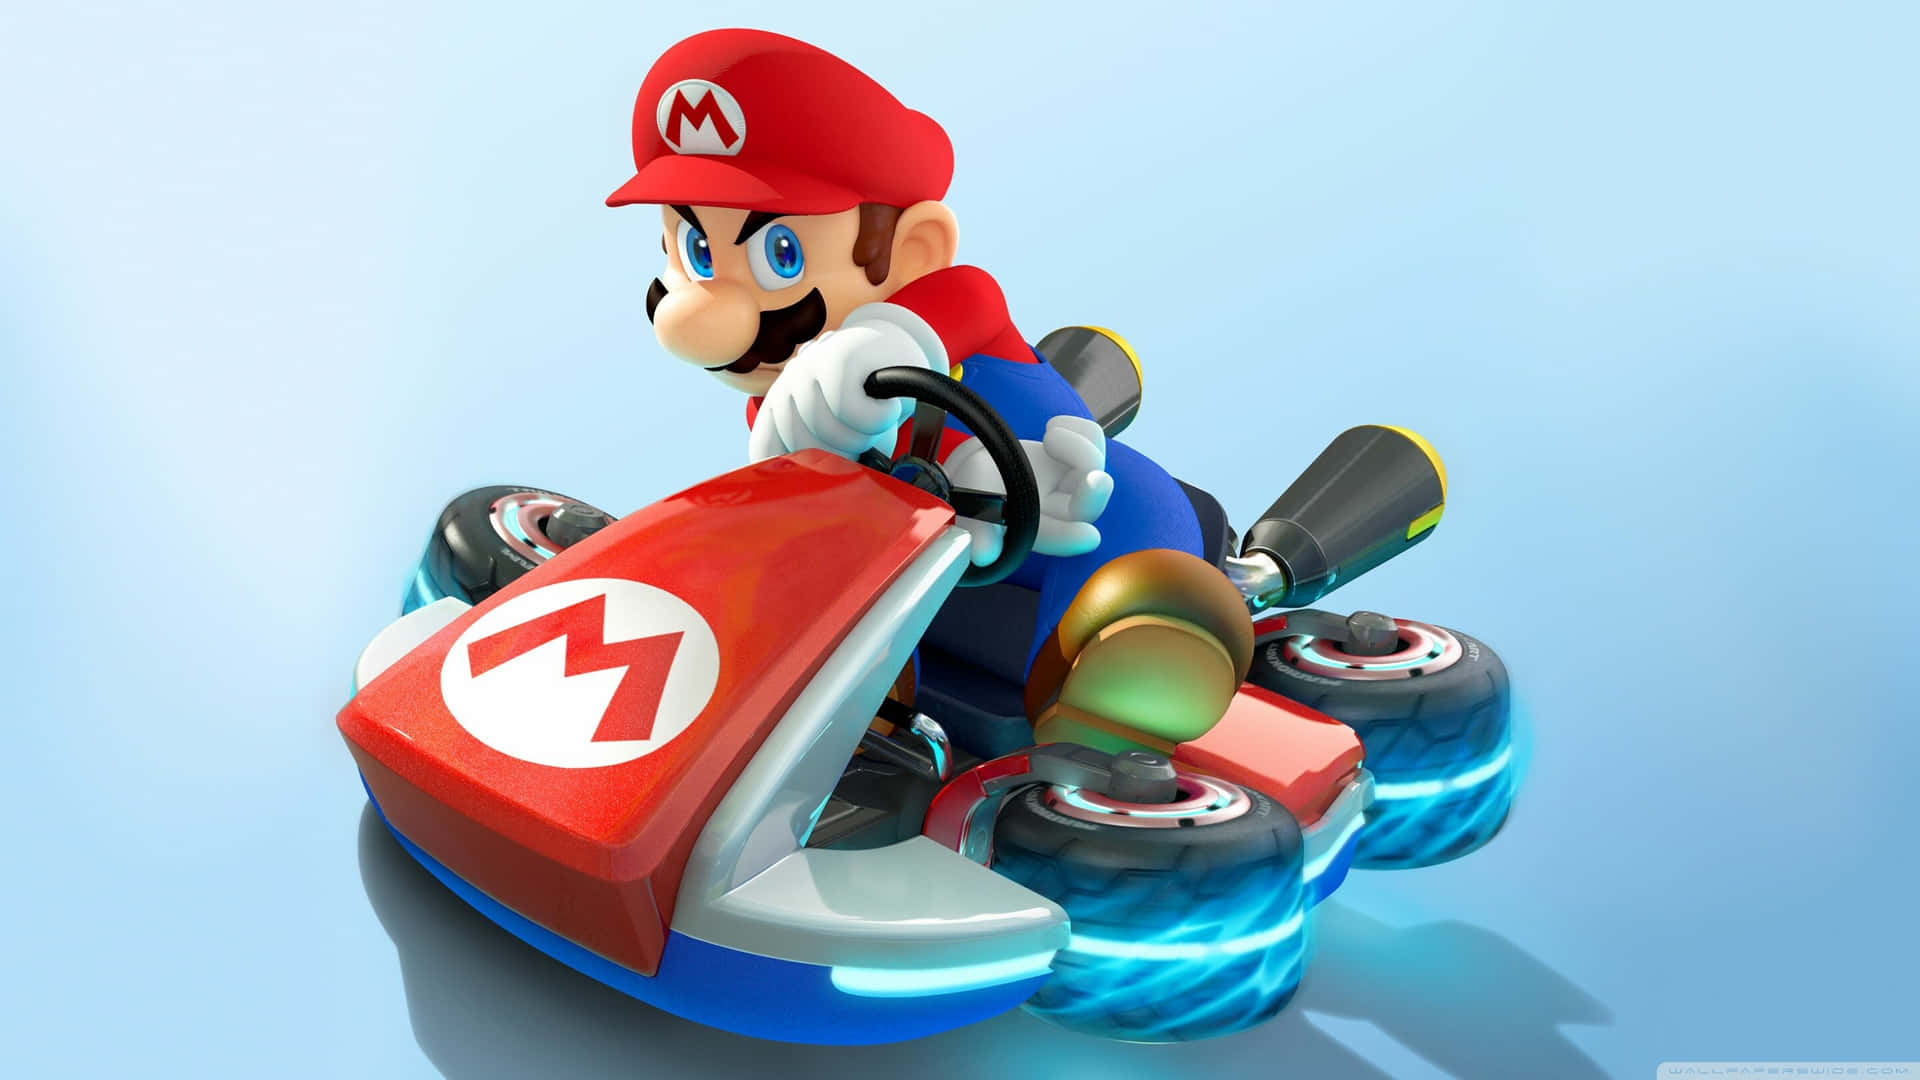 Grab your plumber's cap because the iconic Cool Mario is ready to explore! Wallpaper